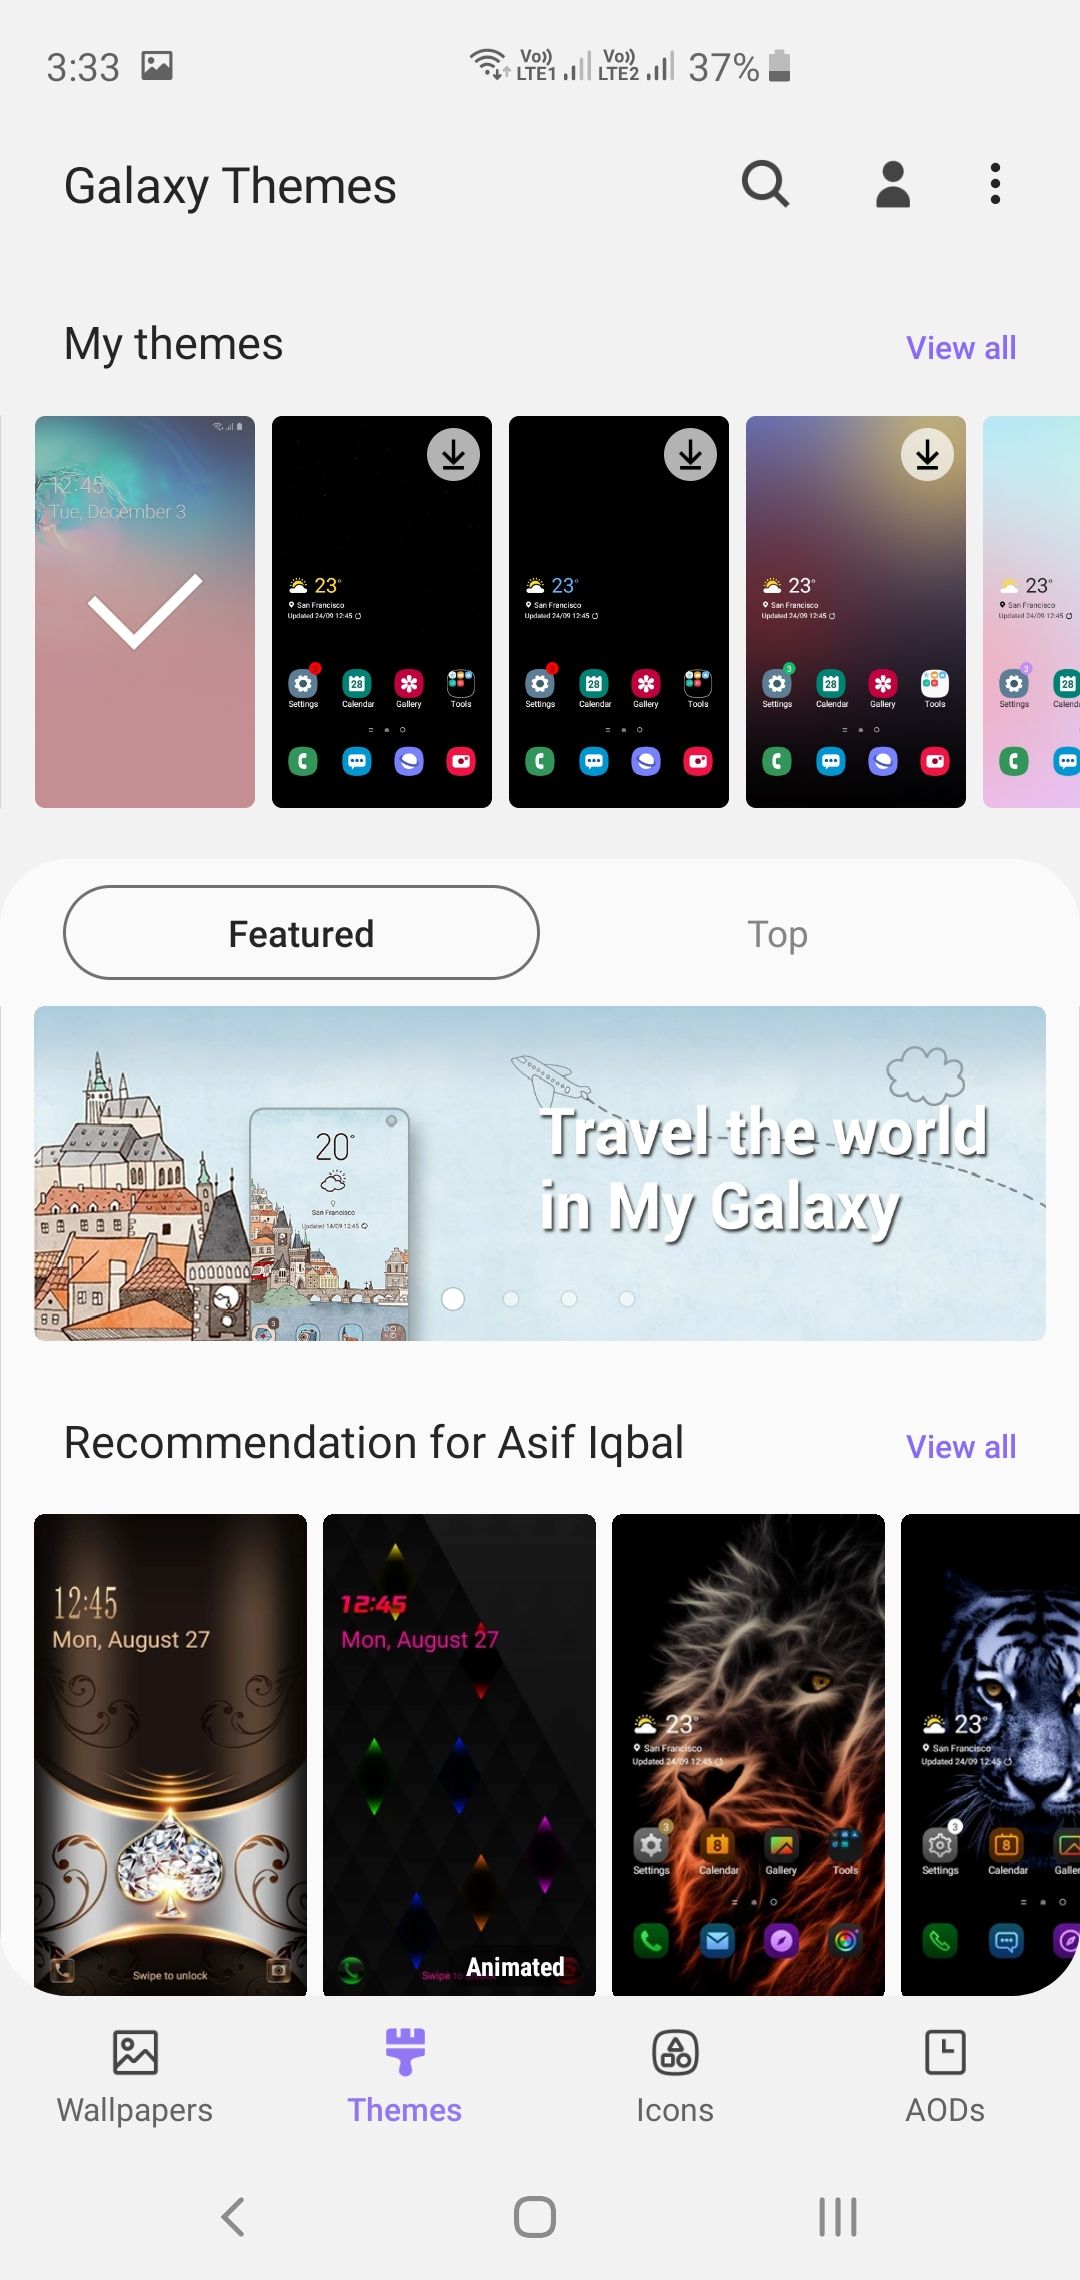 Samsung Galaxy S10+ AOD, Icons, Themes, Wallpapers Customization